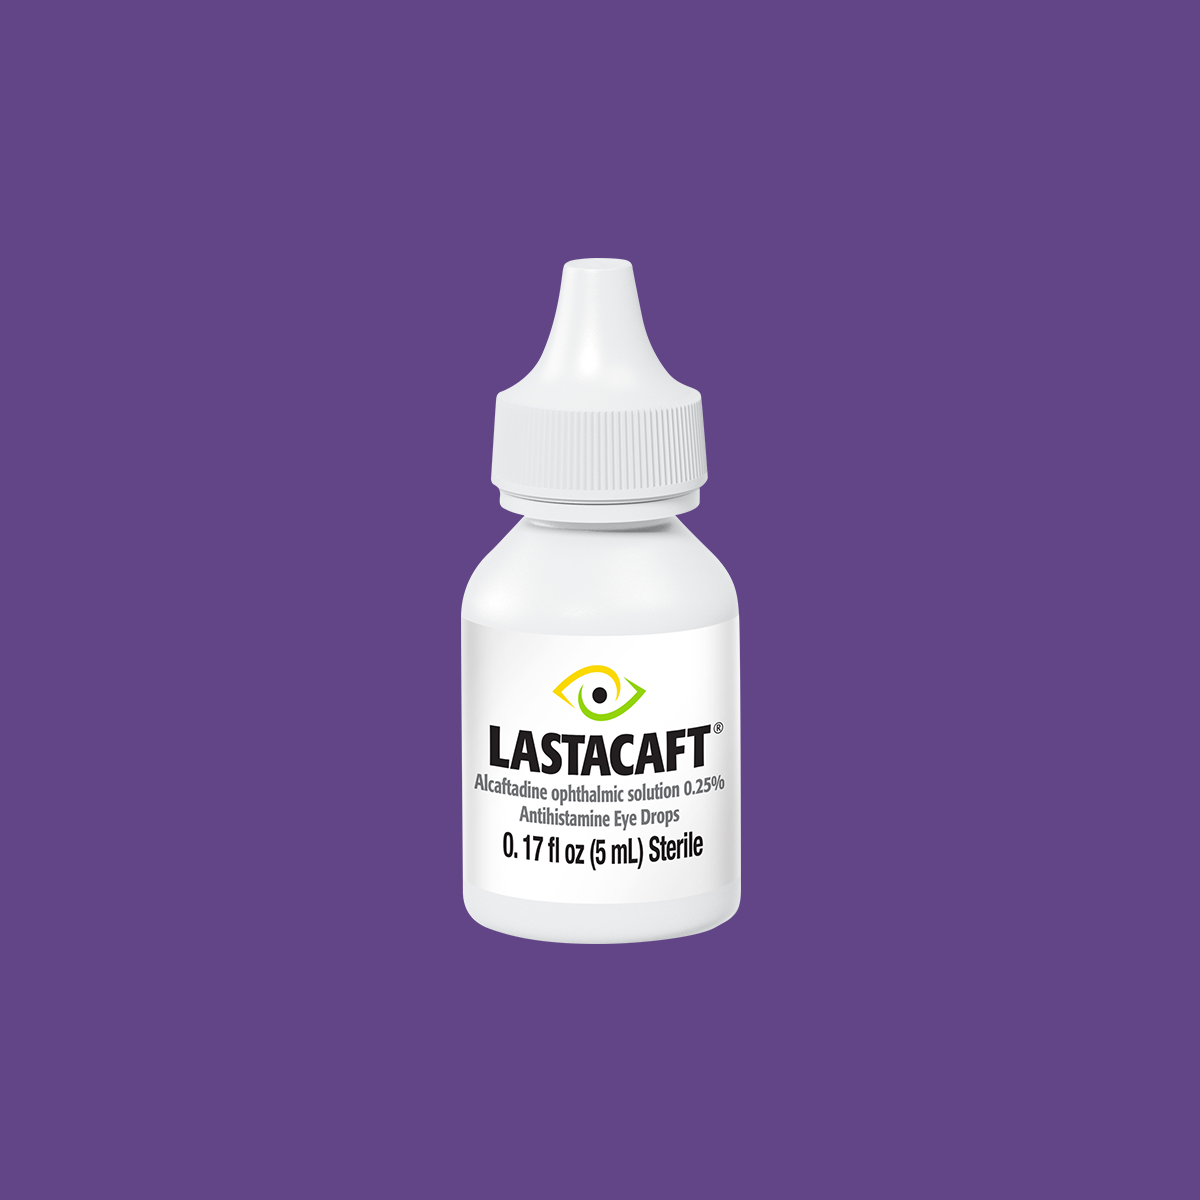 Lastacaft Once Daily Eye Allergy Itch Relief Drops (5mL 60 Day Bottle)